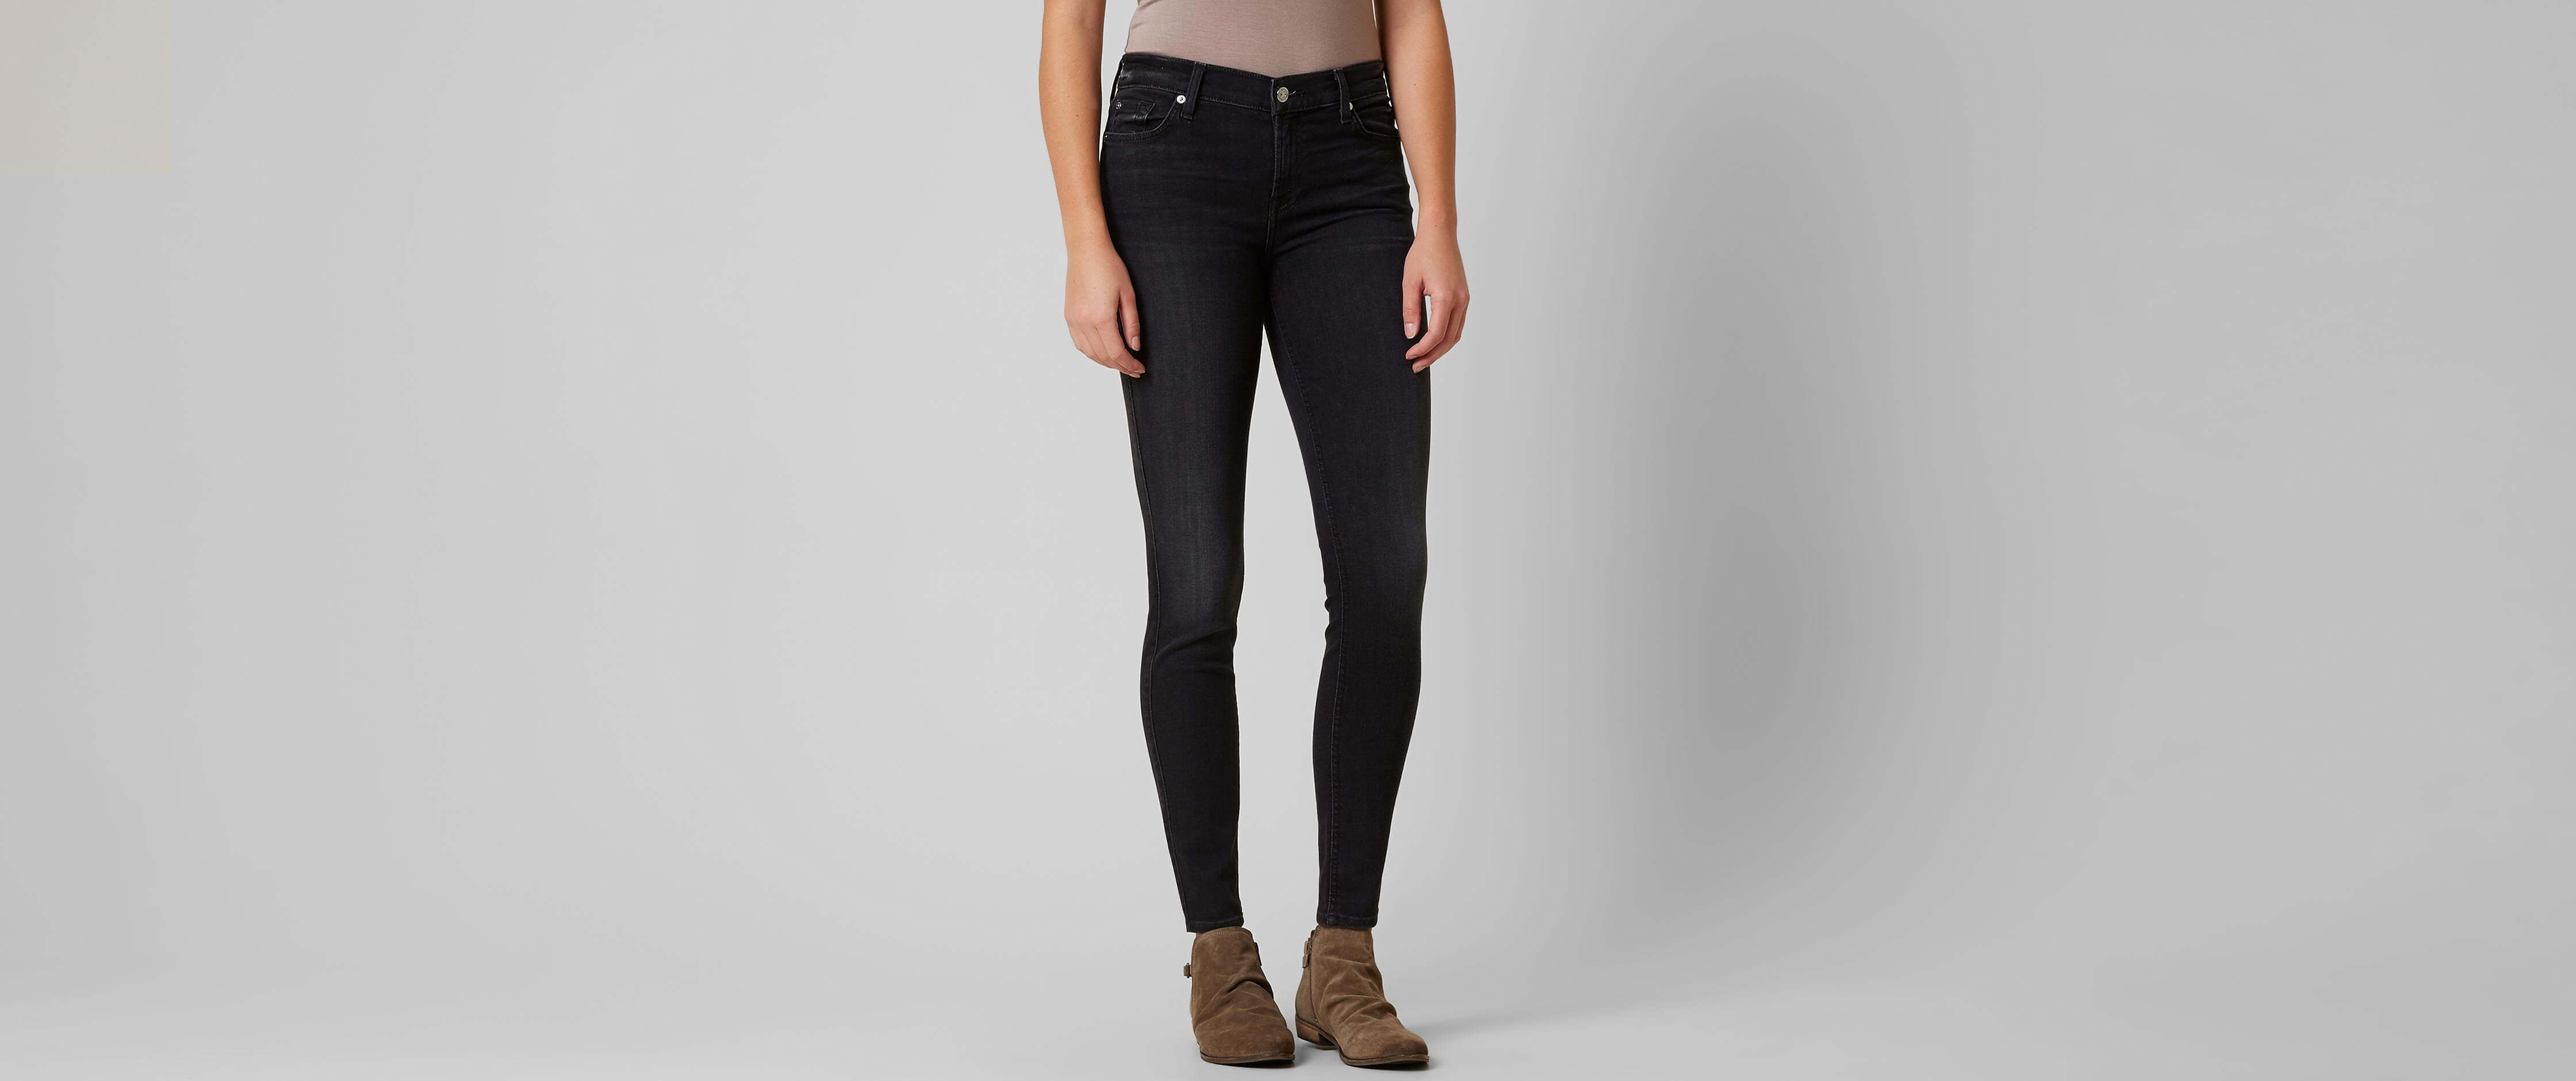 7 for all mankind women's jeans